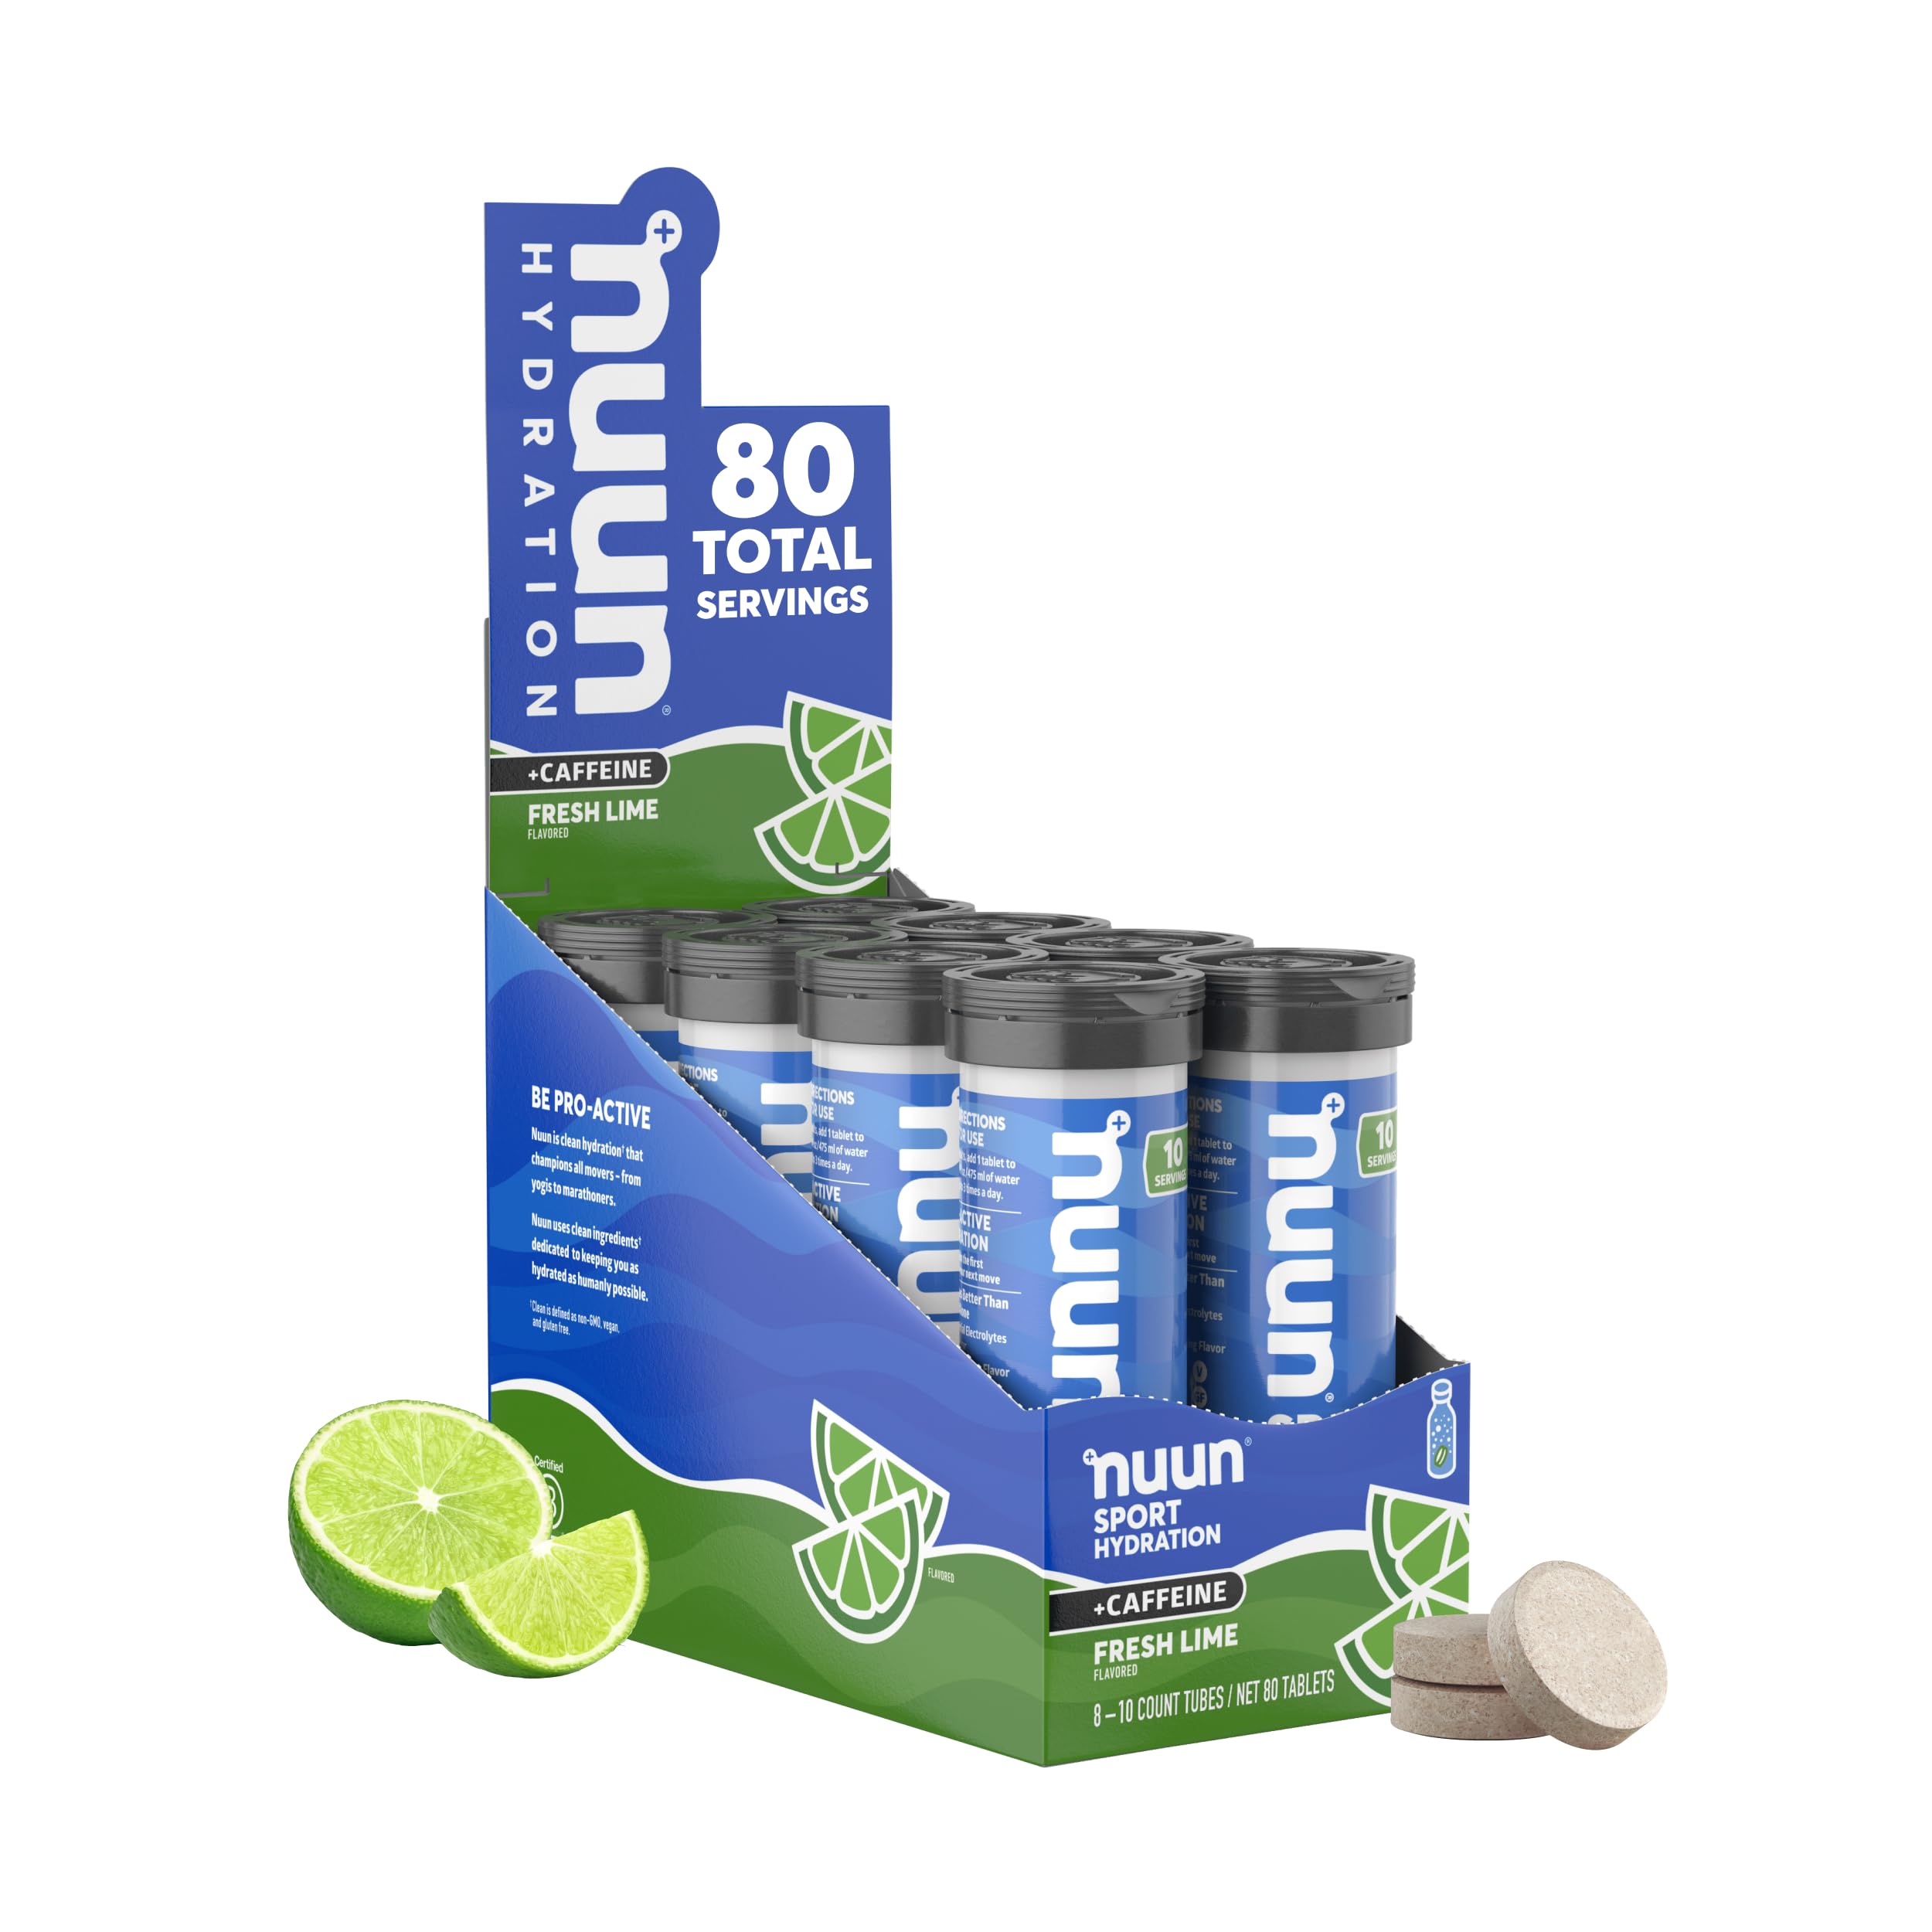 Nuun Sport Caffeine Electrolyte Tablets for Proactive Hydration, Fresh Lime, 8 Pack 80 Servings $20.82